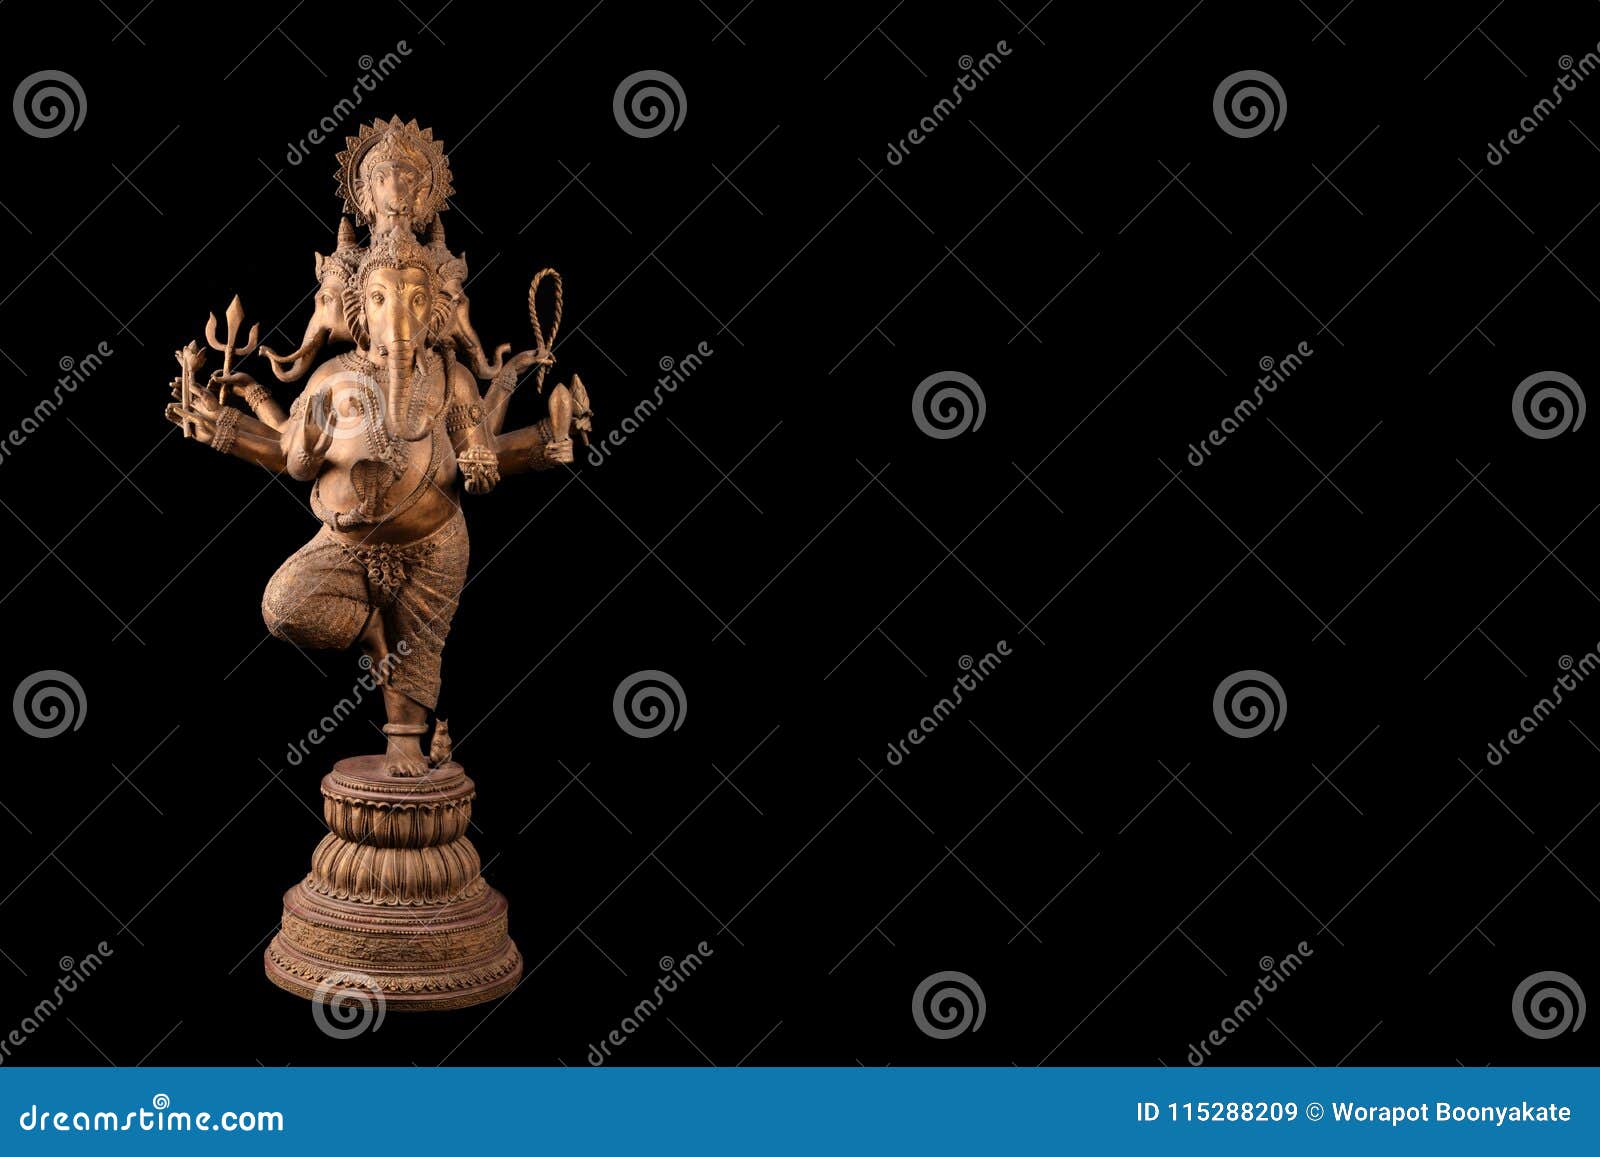 Download Ganesh Black And White Sculpture Wallpaper | Wallpapers.com